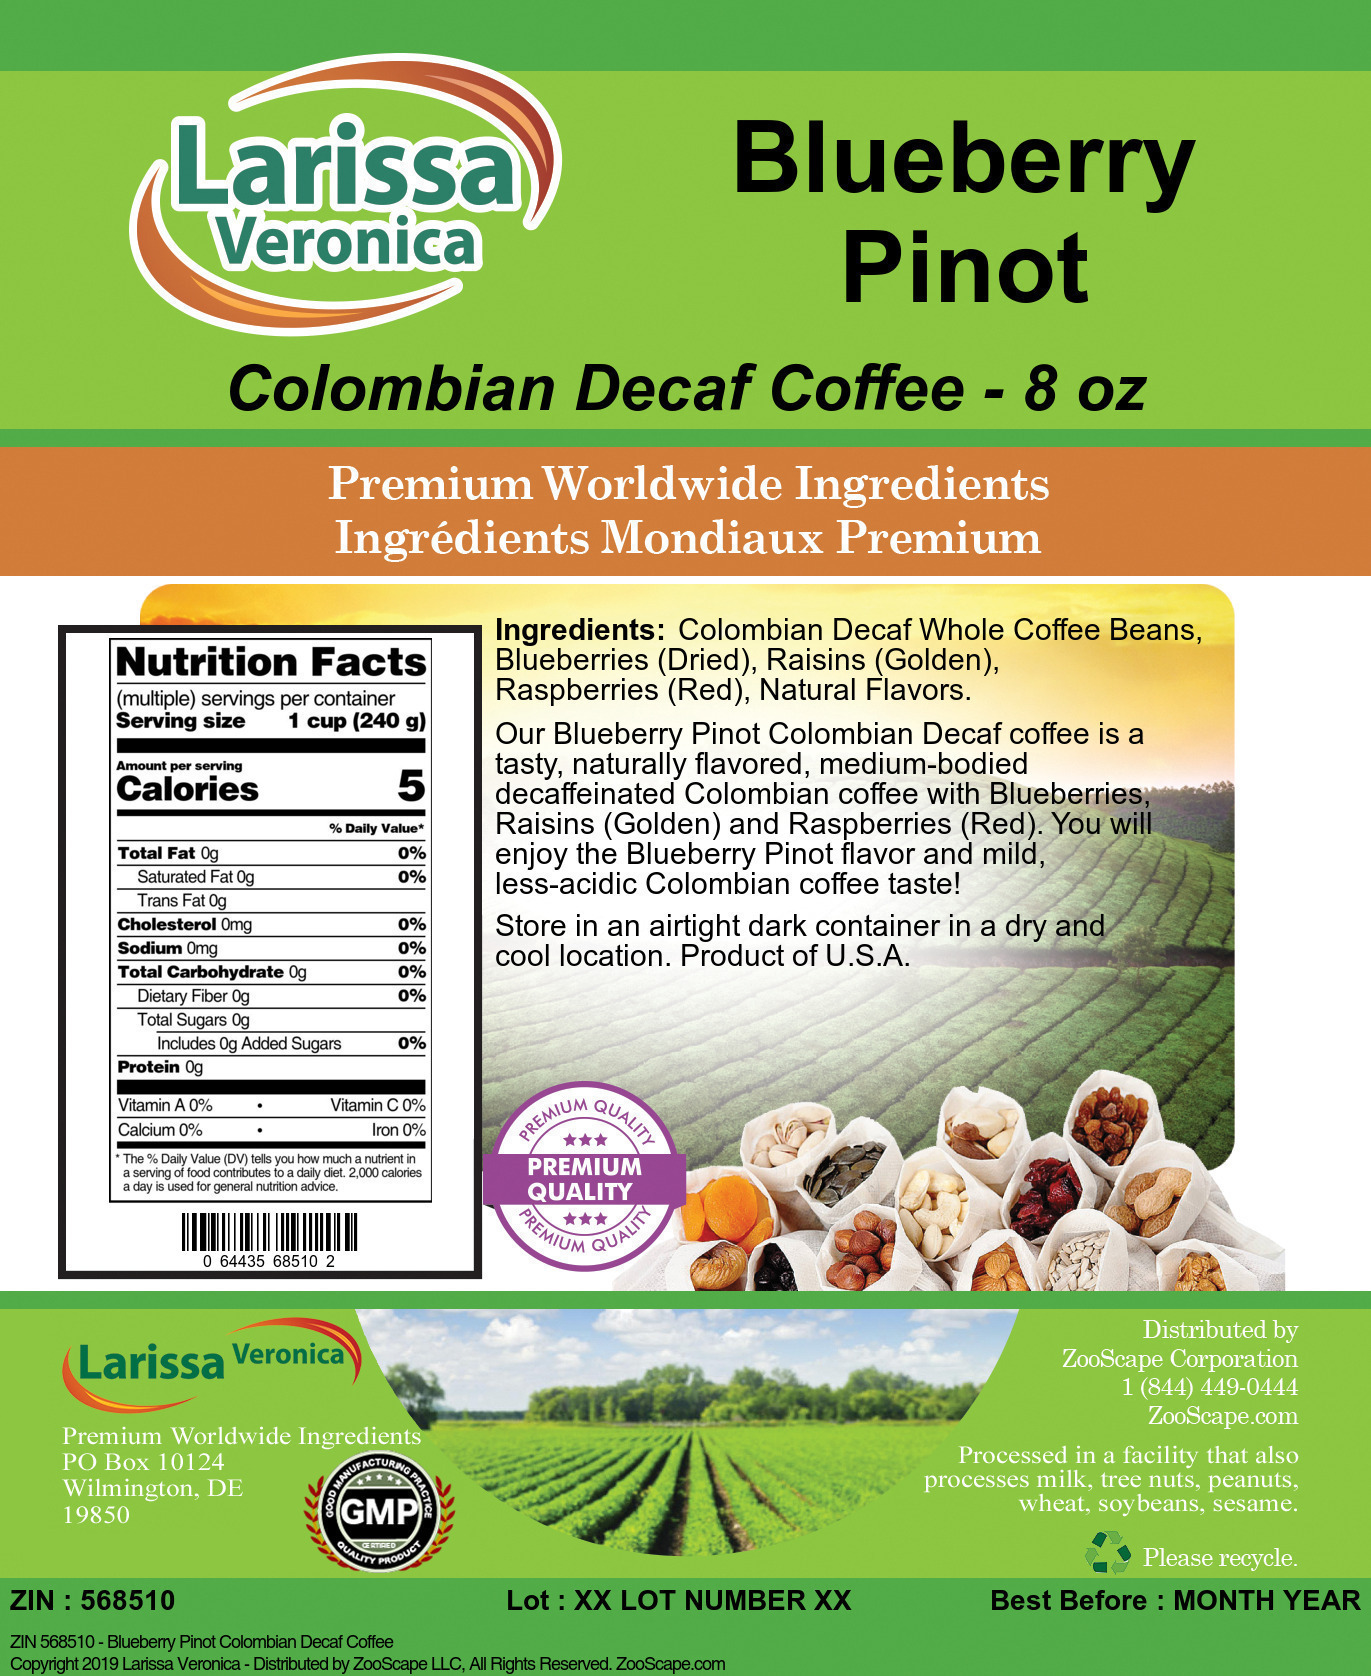 Blueberry Pinot Colombian Decaf Coffee - Label